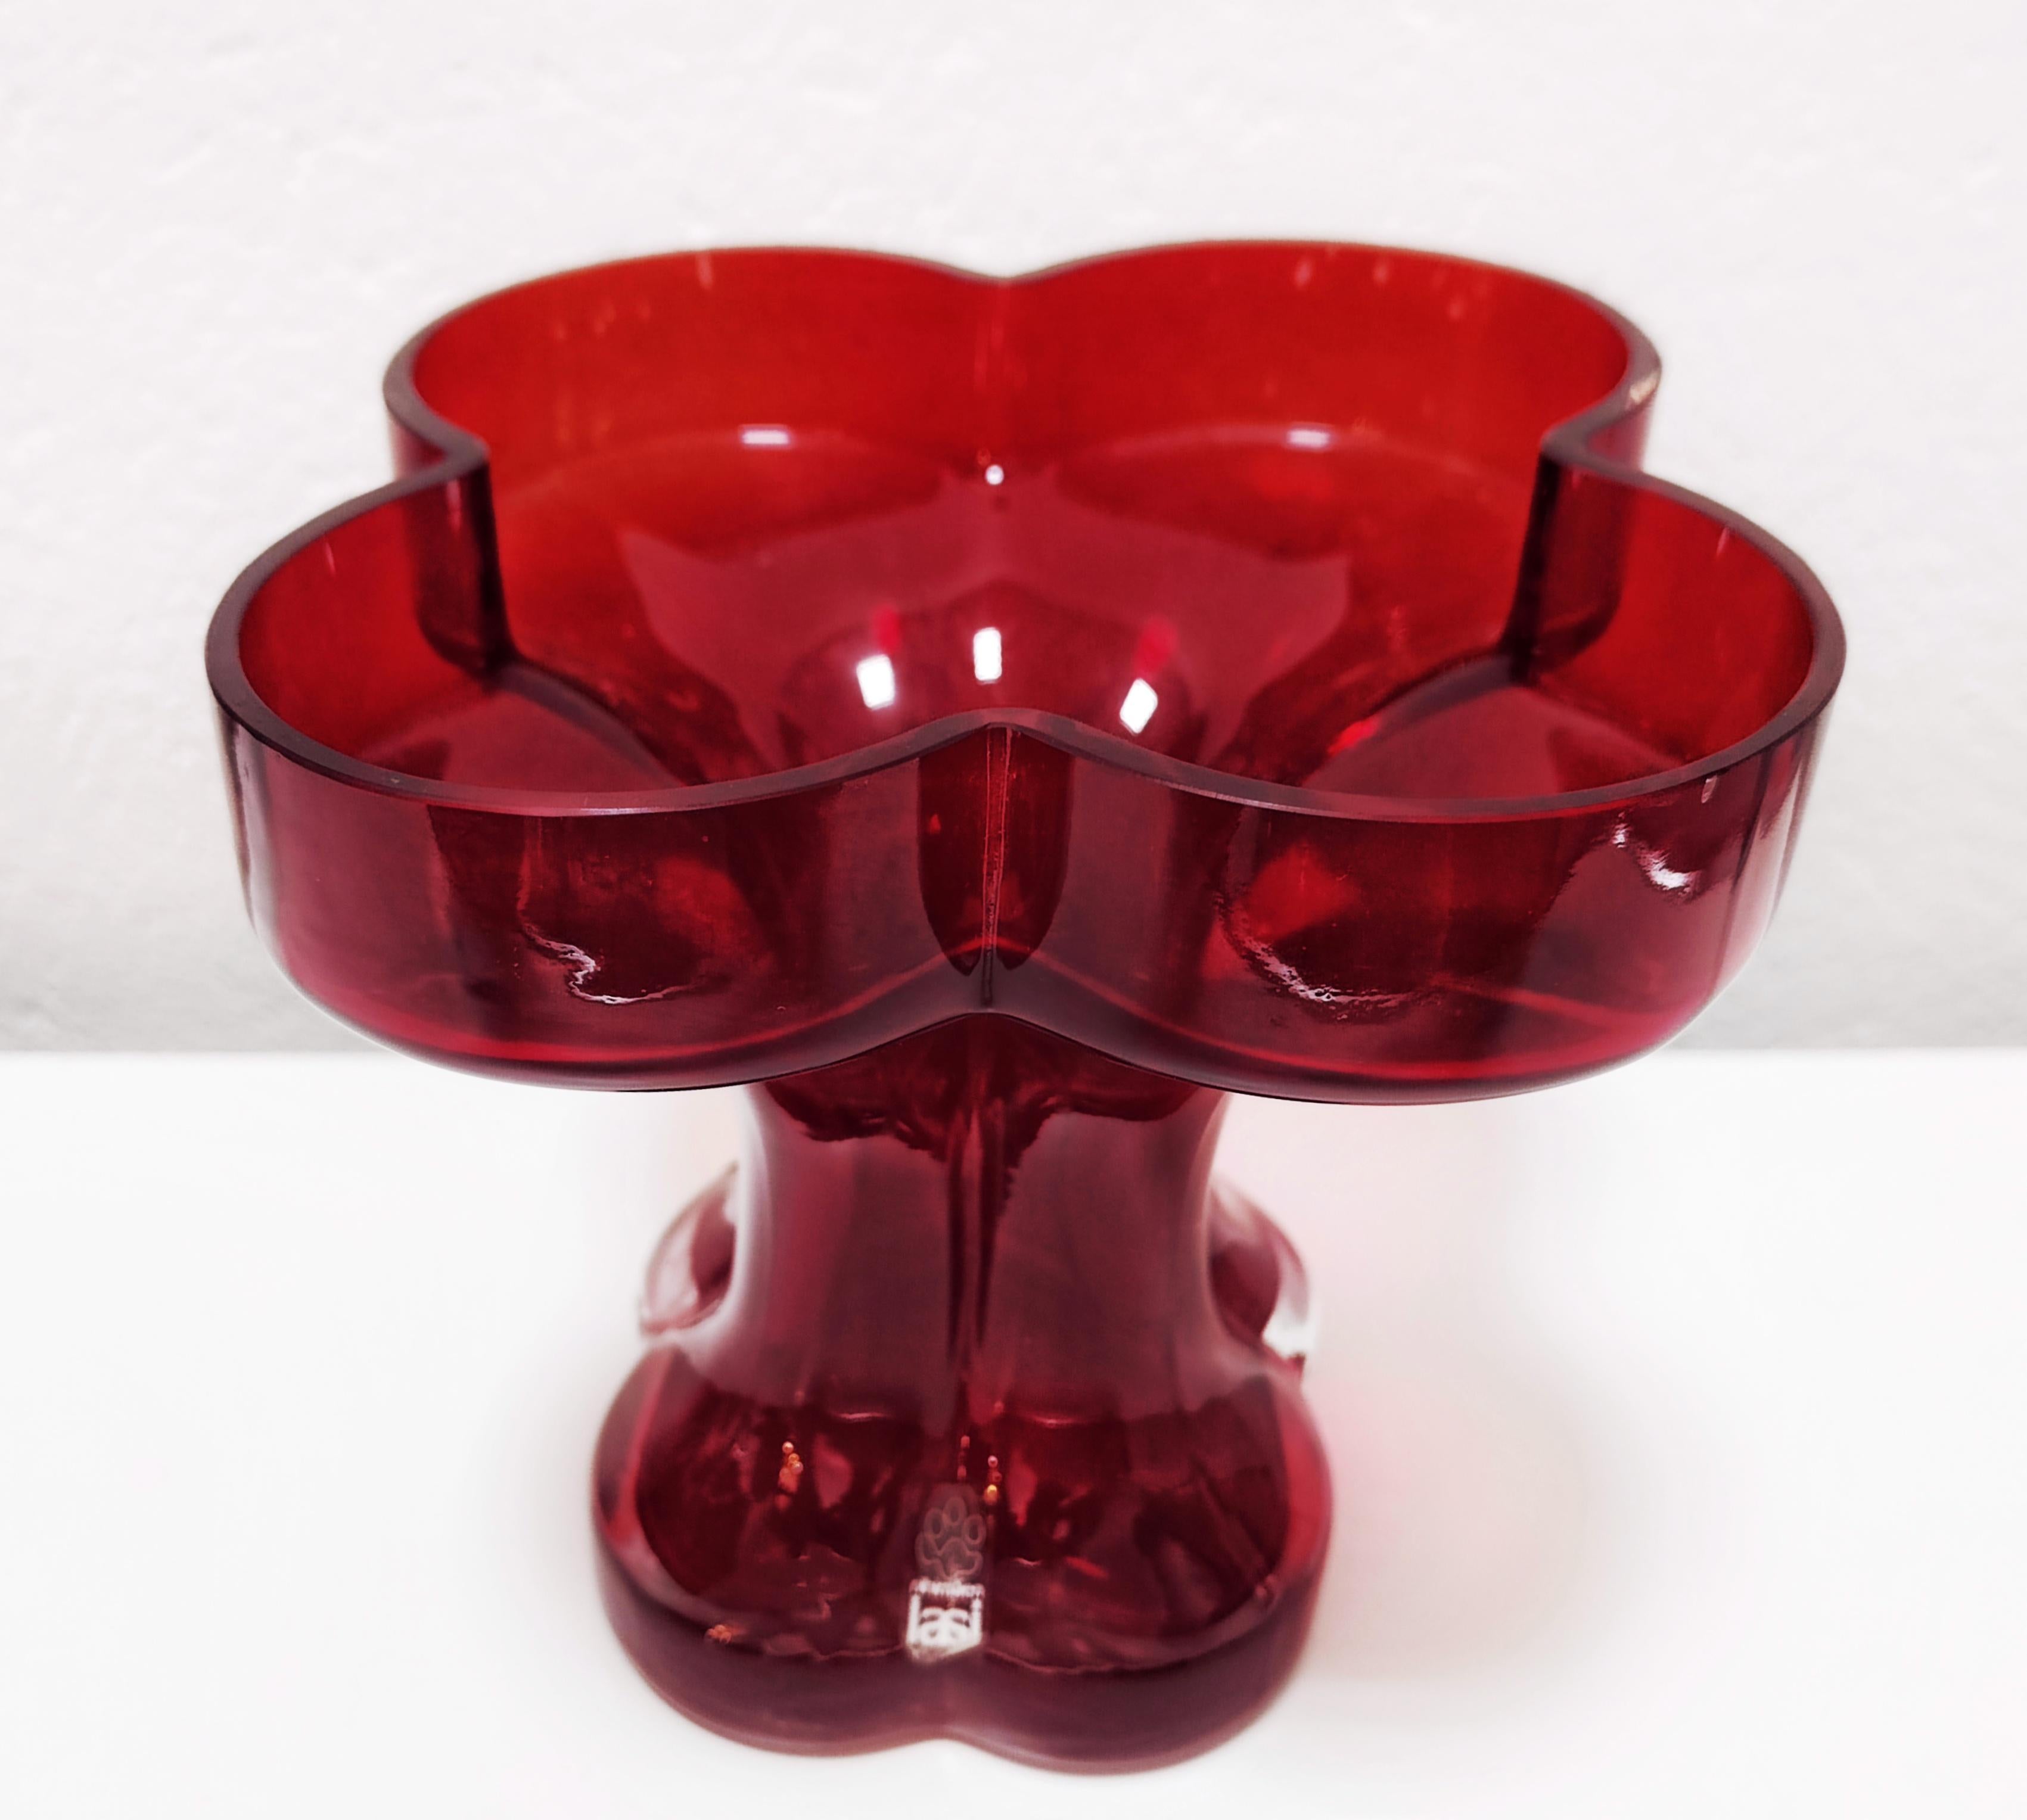 In this listing you will find a rare Mid Century Modern Clover shaped Vase, officially known as Onnenlehti vase for Riihimäki Glassworks, designed by Helena Tynell in 1971. The red Onnenlehti vase suits various flower arrangements and it makes a